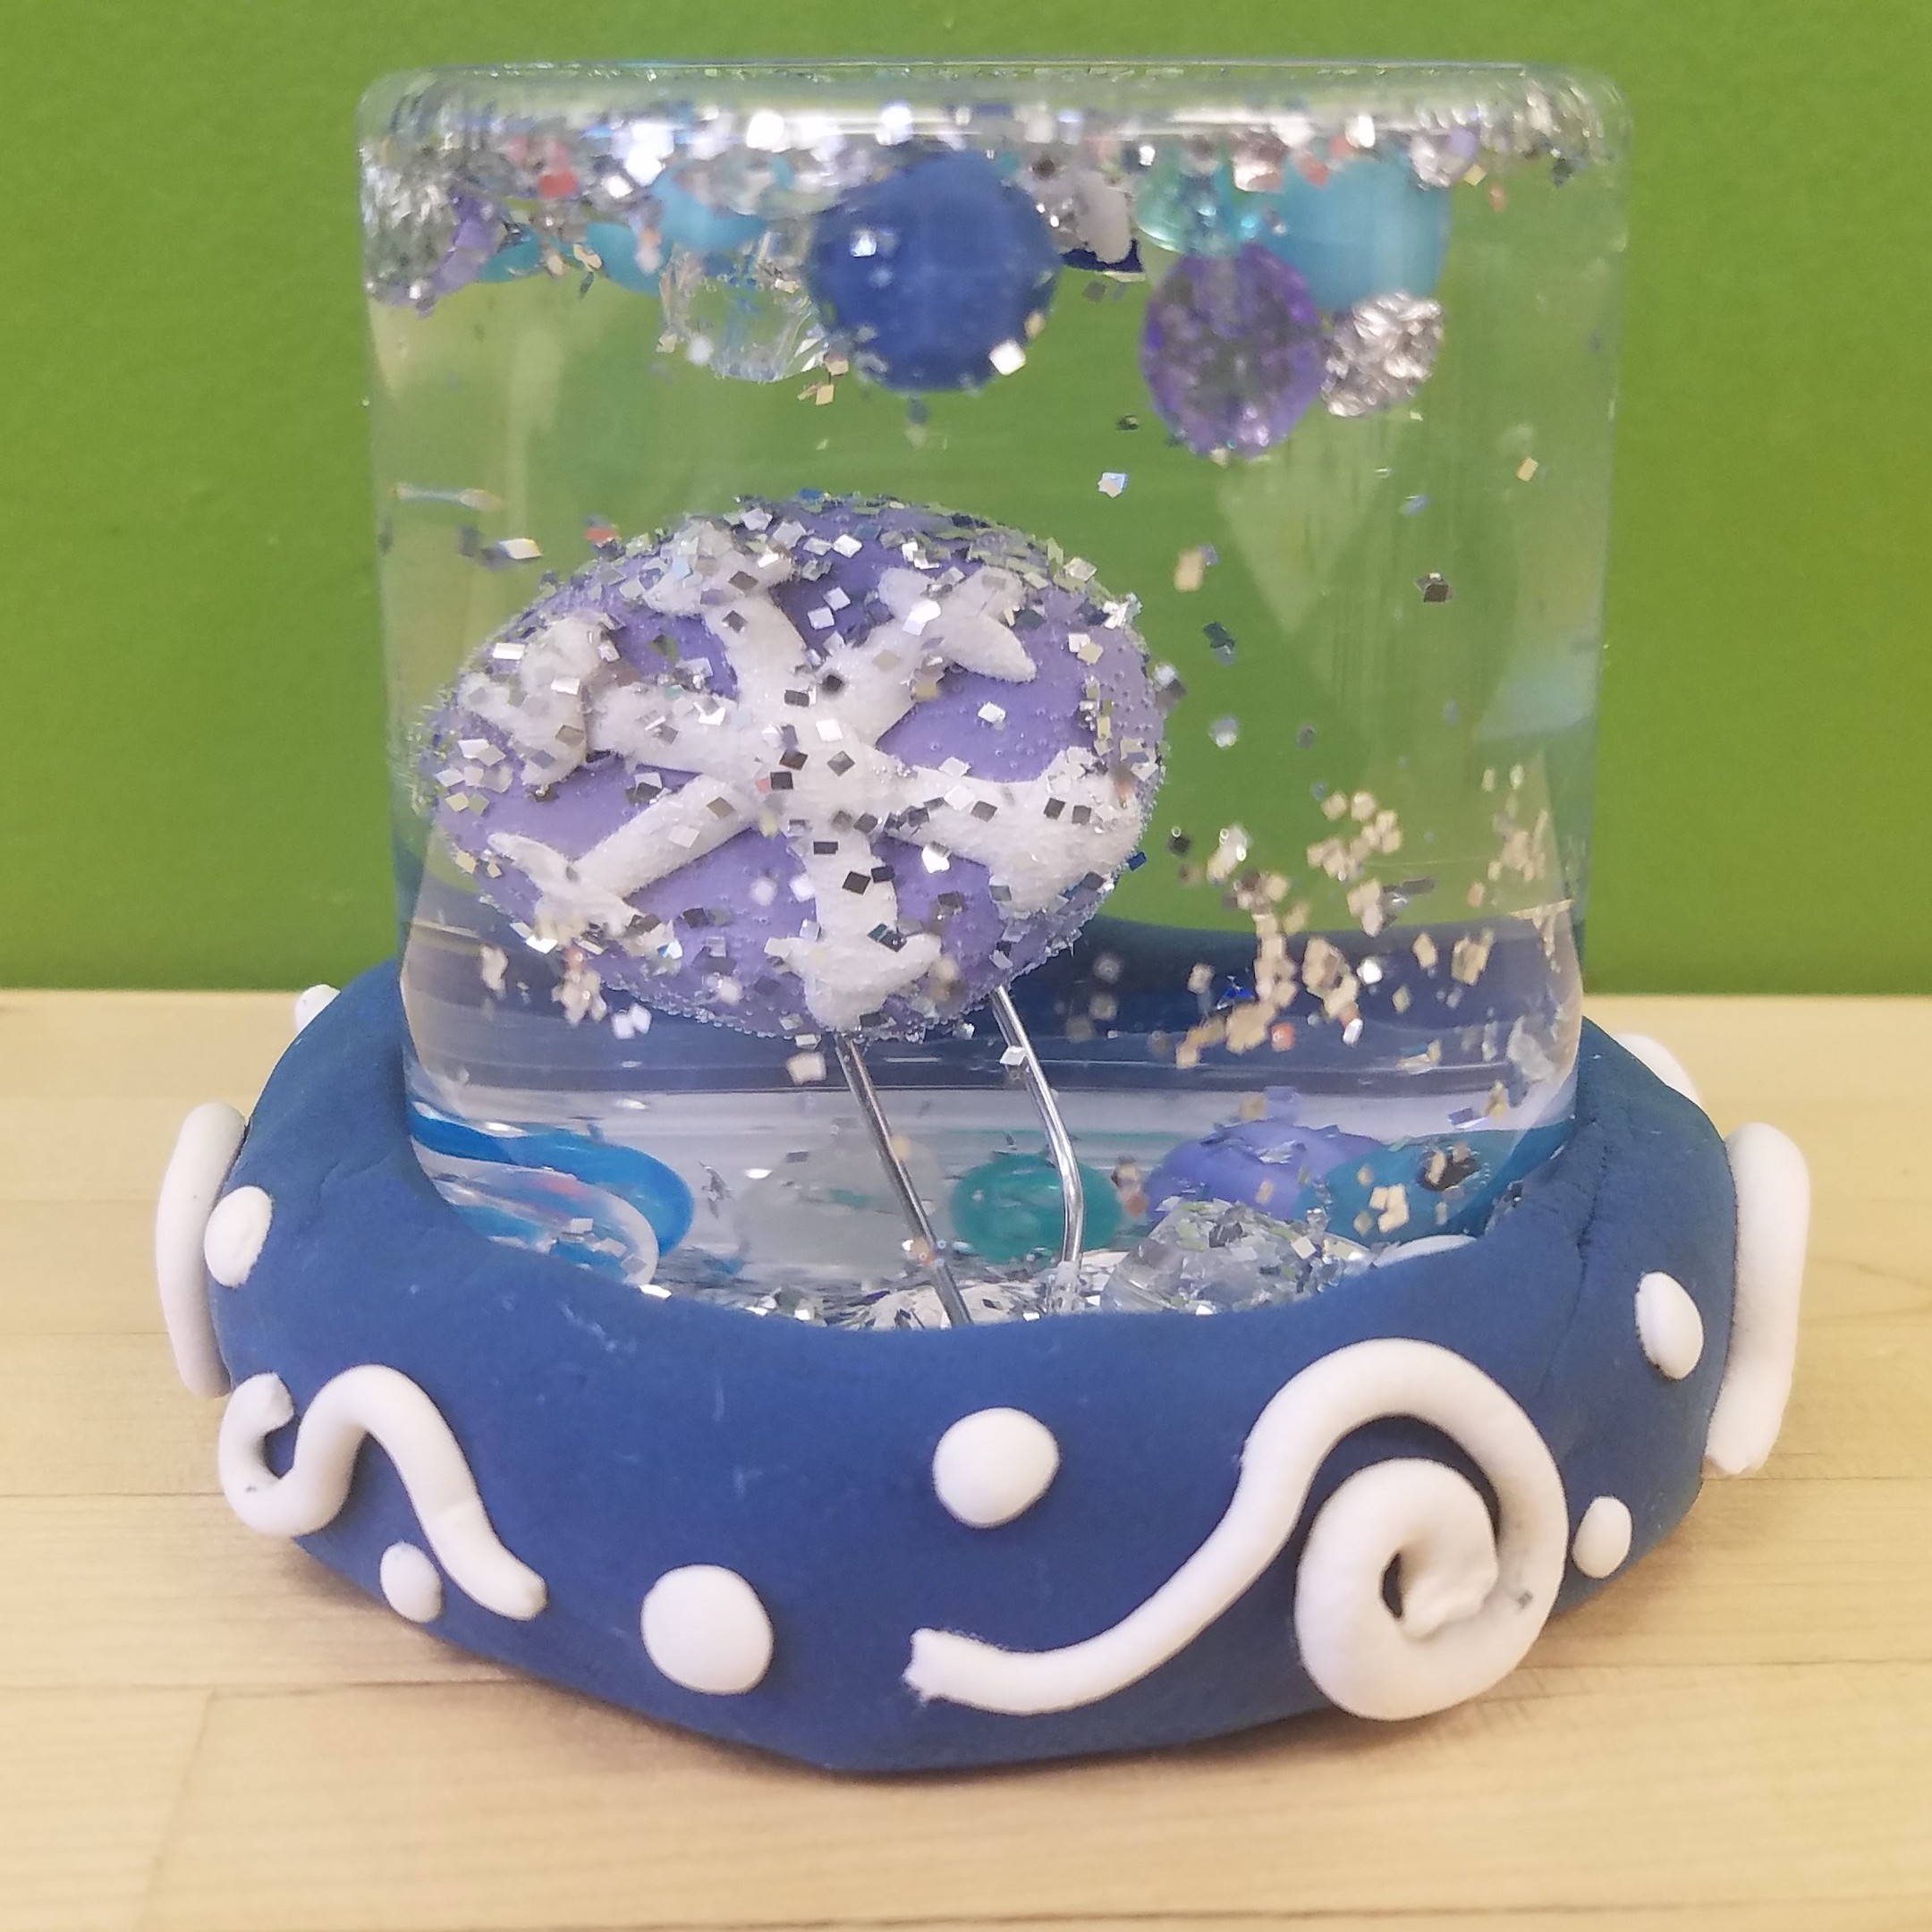 Kidcreate Studio - Chicago Lakeview, How to Make a Snow Globe Art Project